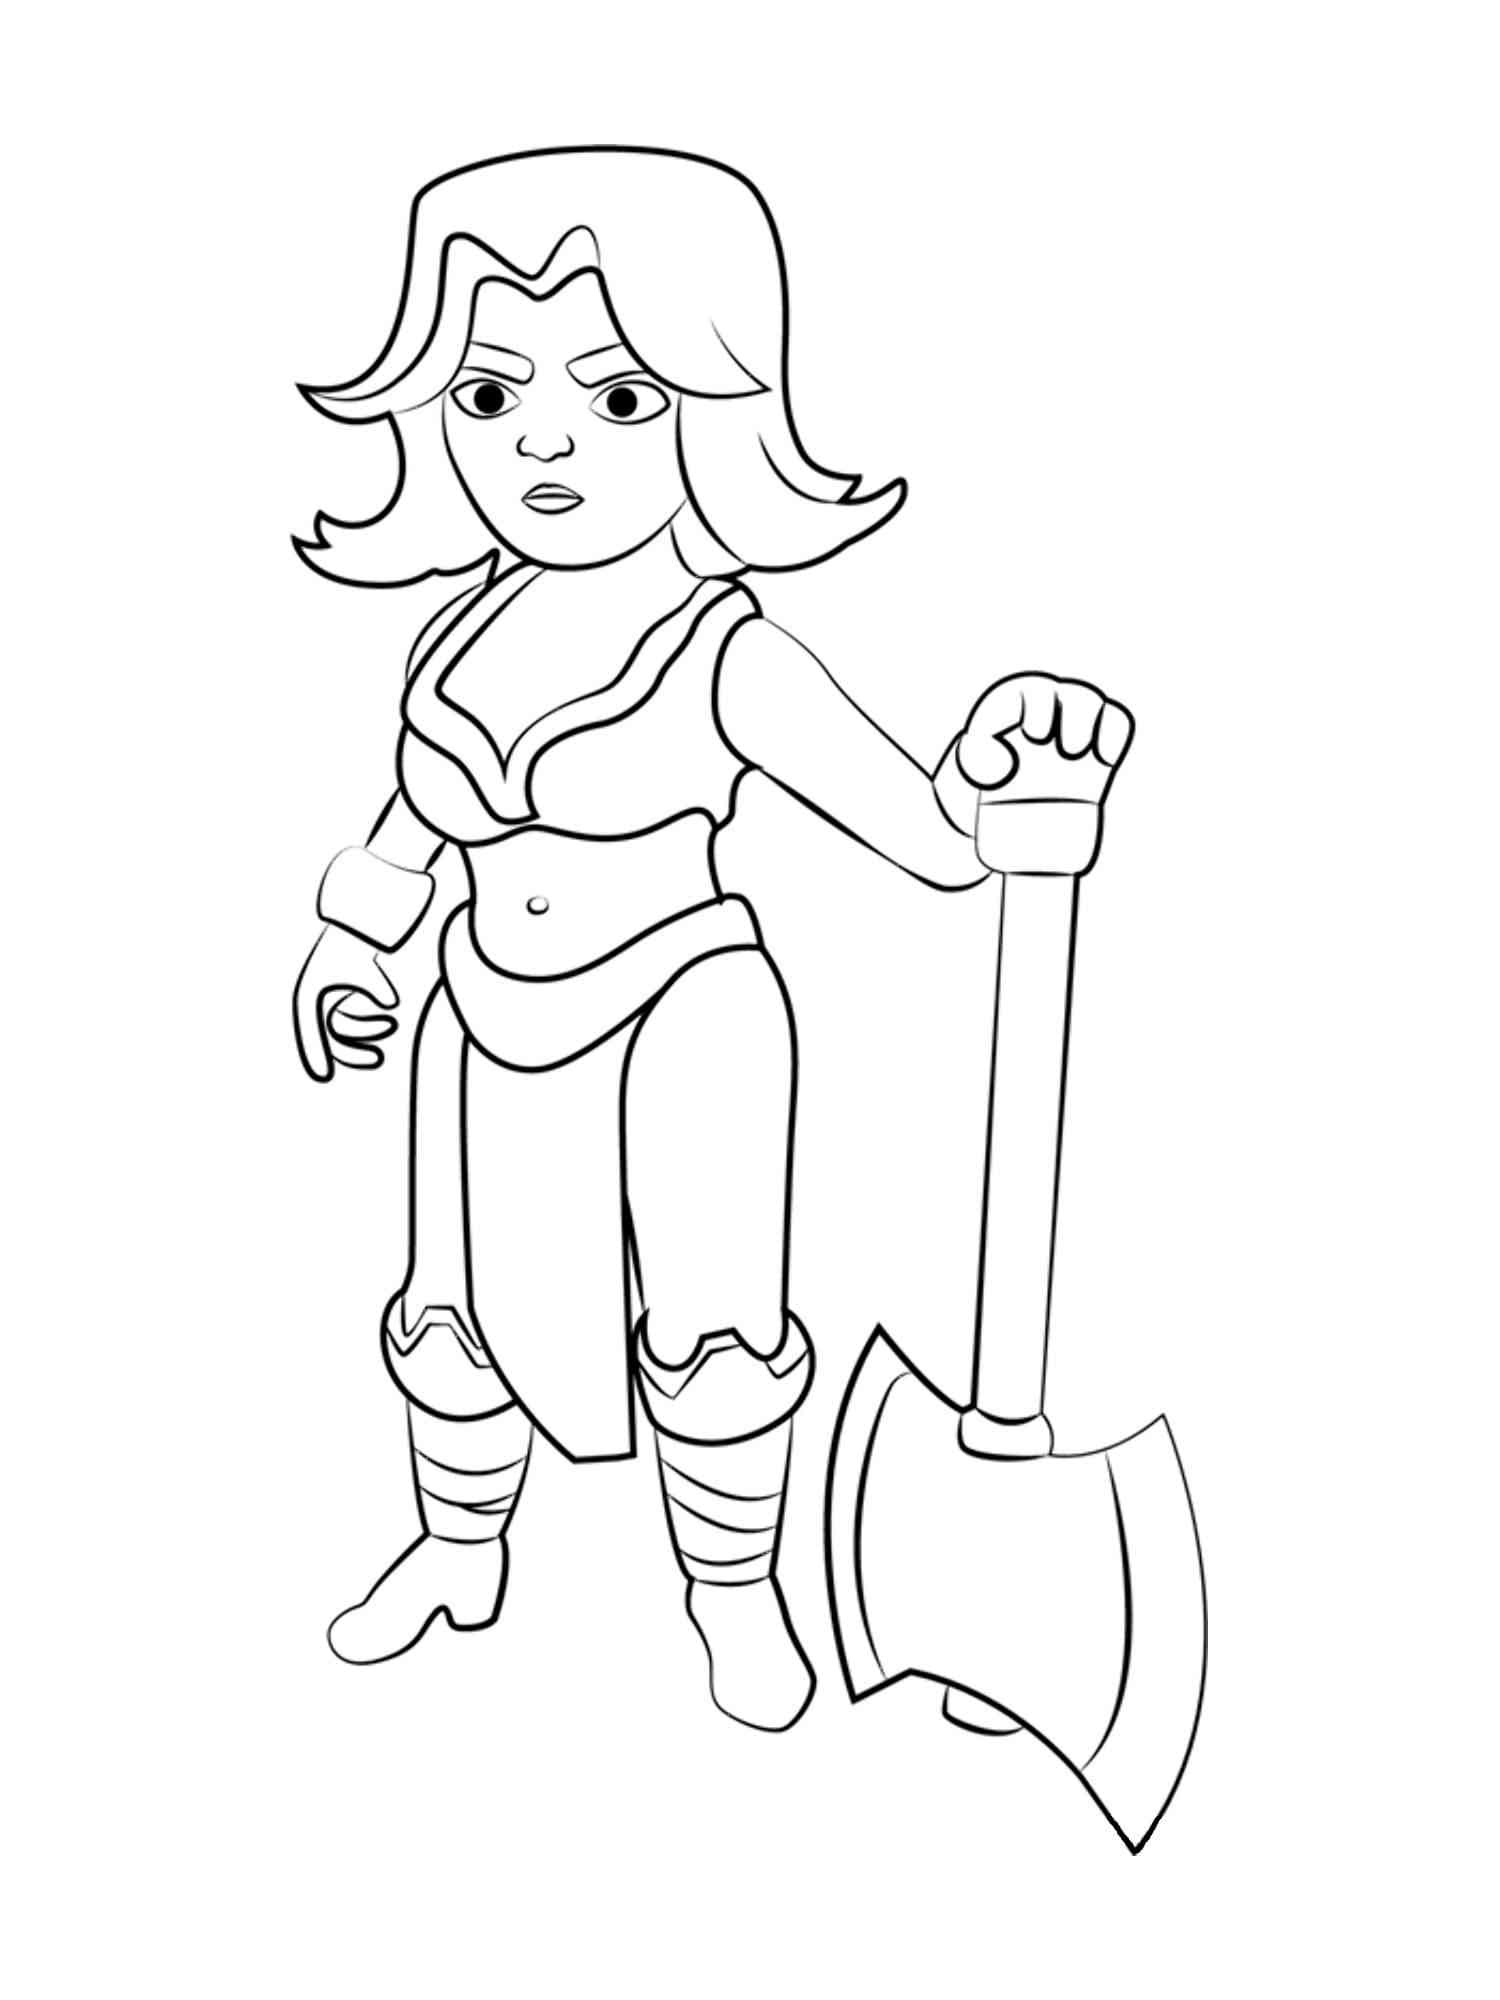 Valkyrie Clash Of Clans coloring page